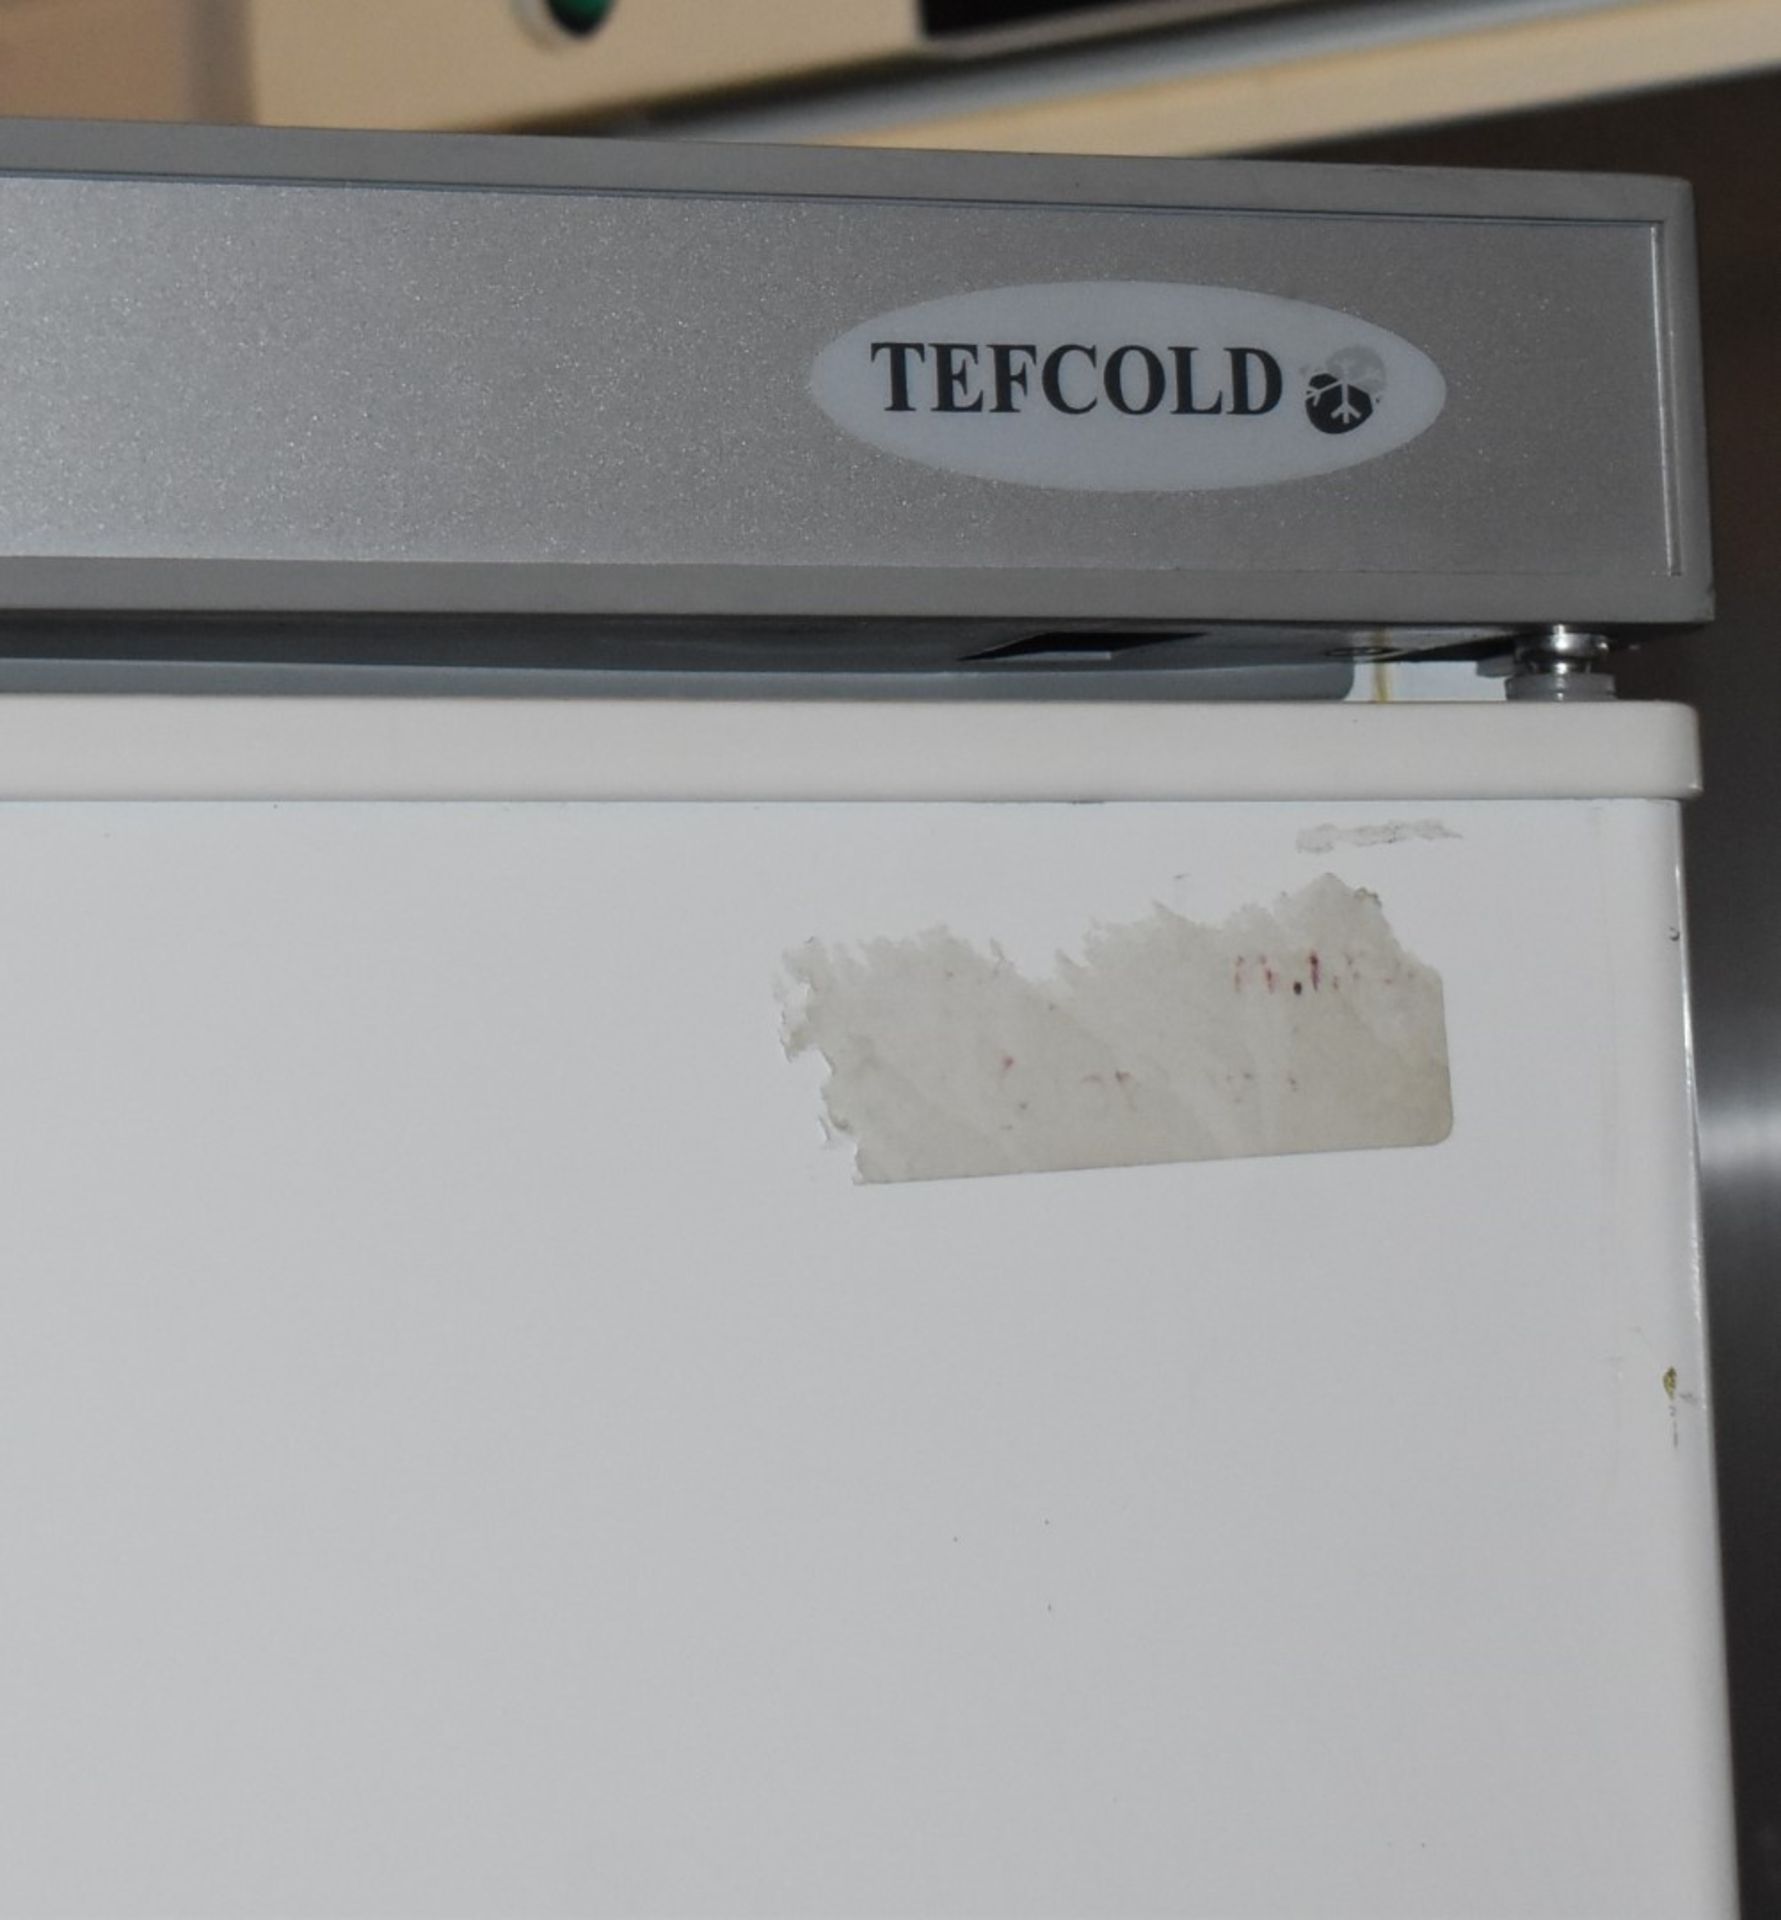 1 x Tefcold UR55 Upright Commercial Solid Door Refrigerator - Size: H172 x W77.7 x D72cms - Ref: - Image 6 of 8